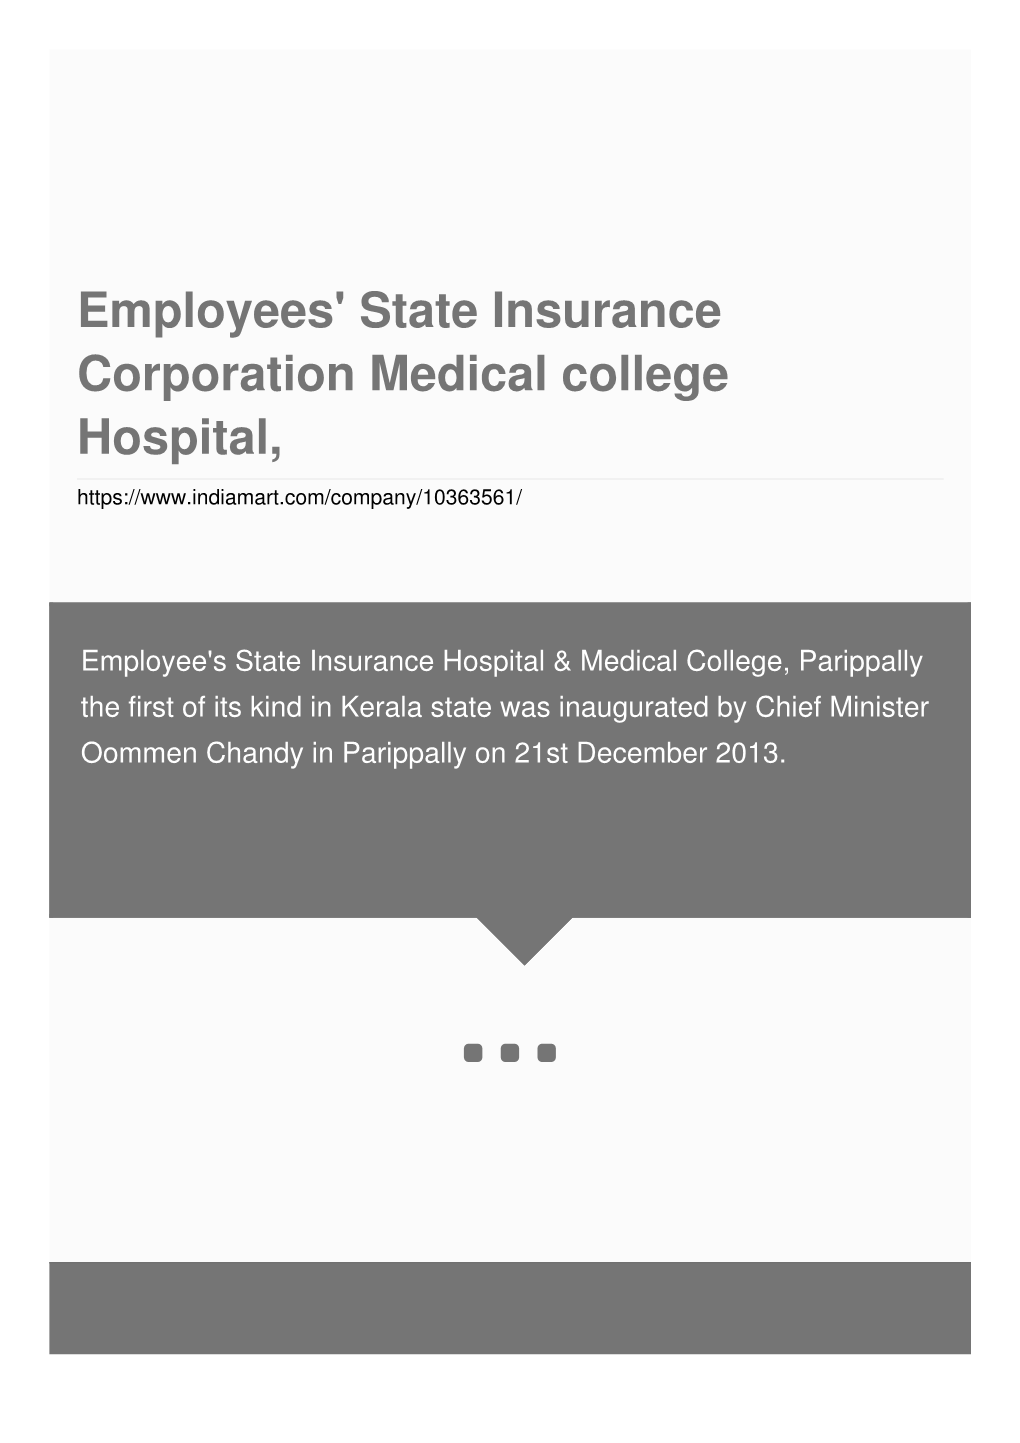 Employees' State Insurance Corporation Medical College Hospital